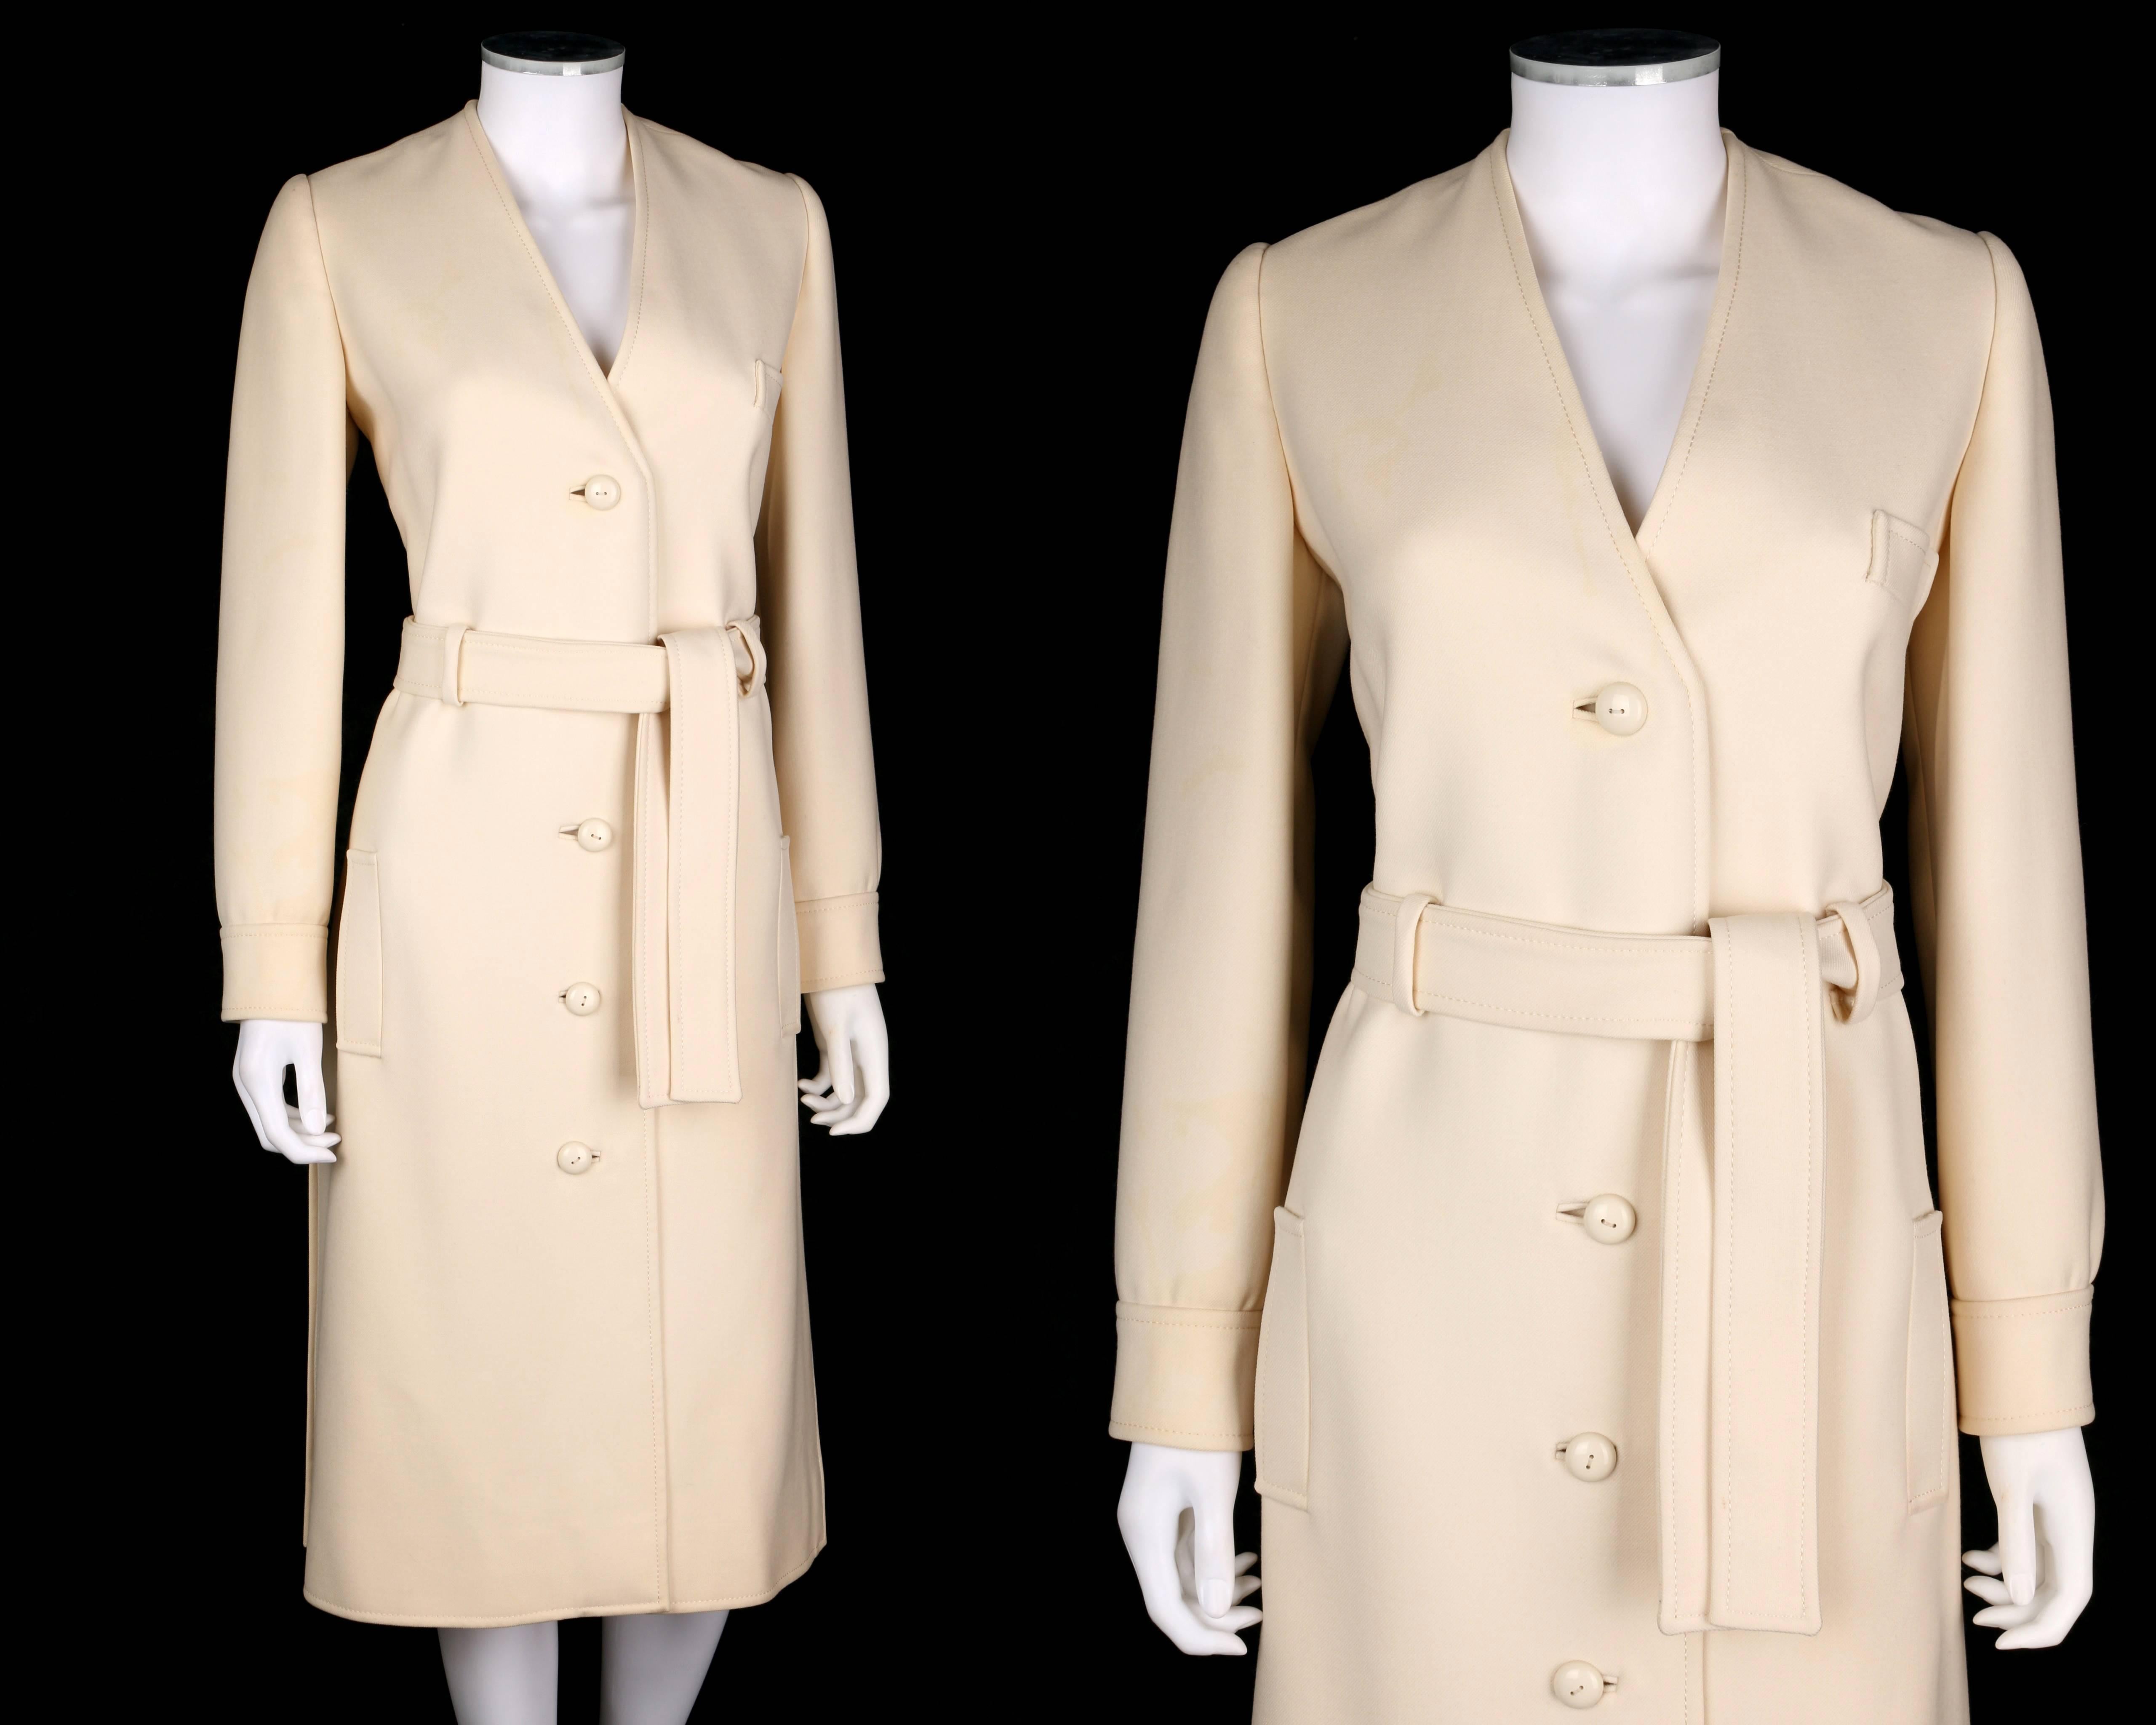 Rare vintage Boutique Valentino c.1960's off white wool belted mod v-neck coat dress. Off white heavy weight wool. Long sleeves with two button closures at cuff. V-neckline. Four center front button closures. Single welt breast pocket. Two single